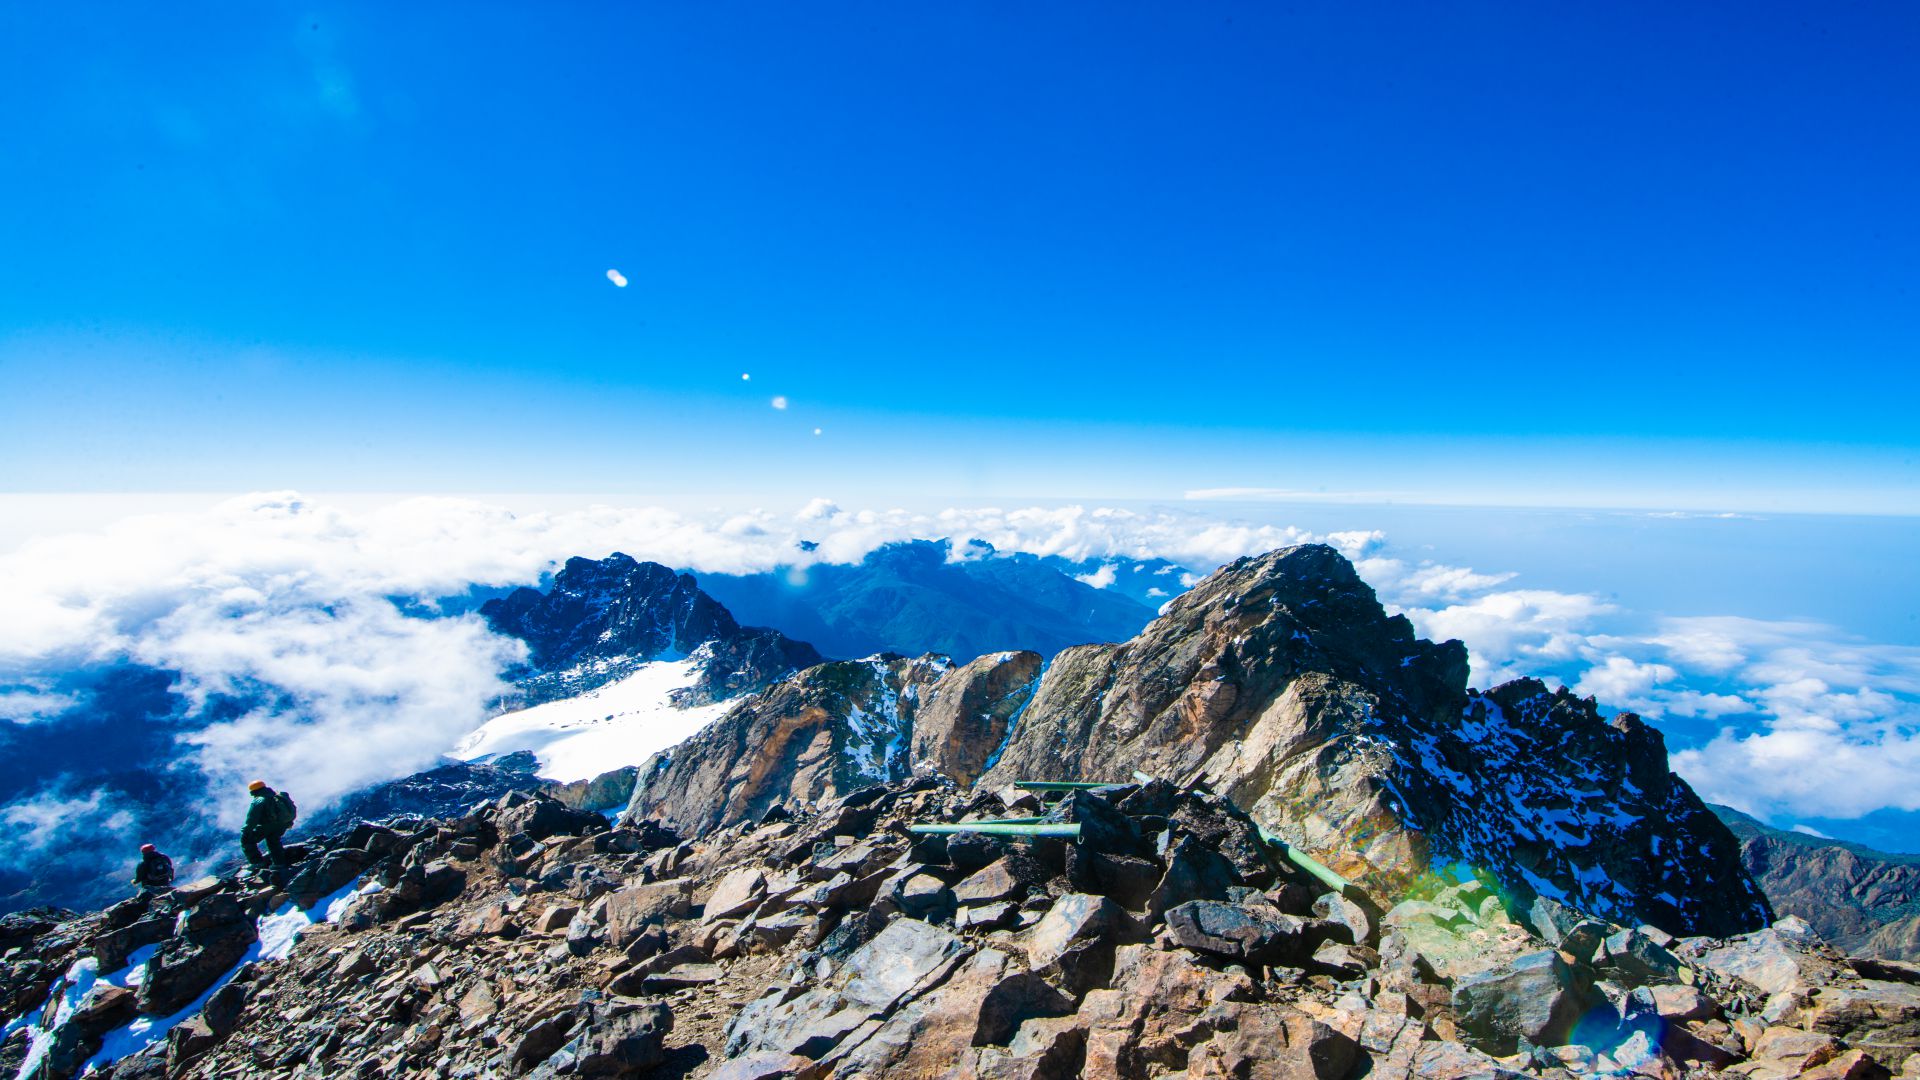 When Is the Best Time to Climb Mount Rwenzori?